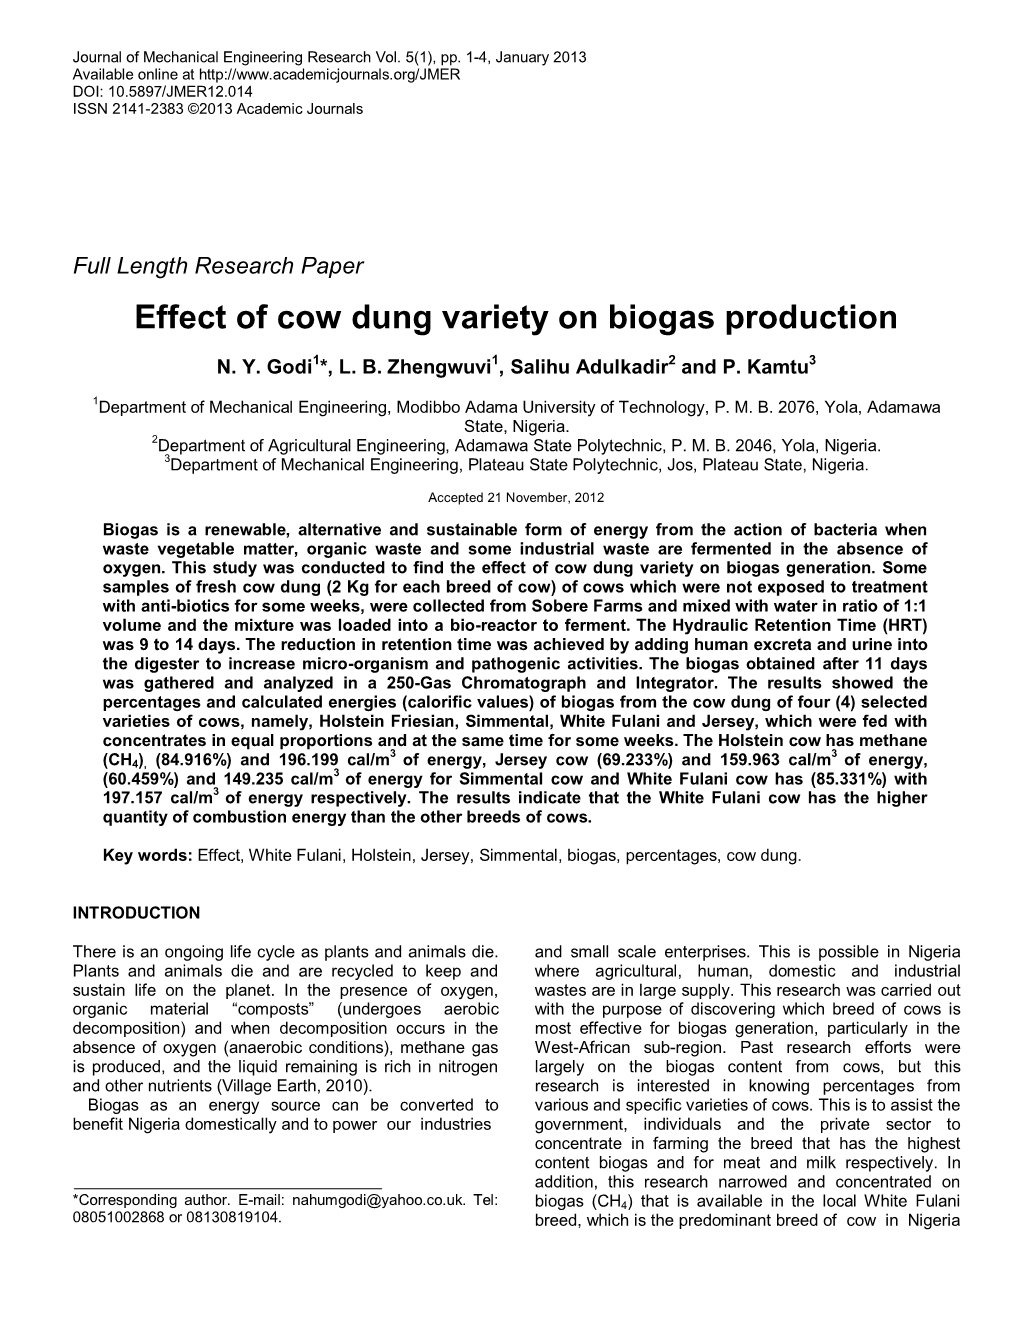 Effect of Cow Dung Variety on Biogas Production